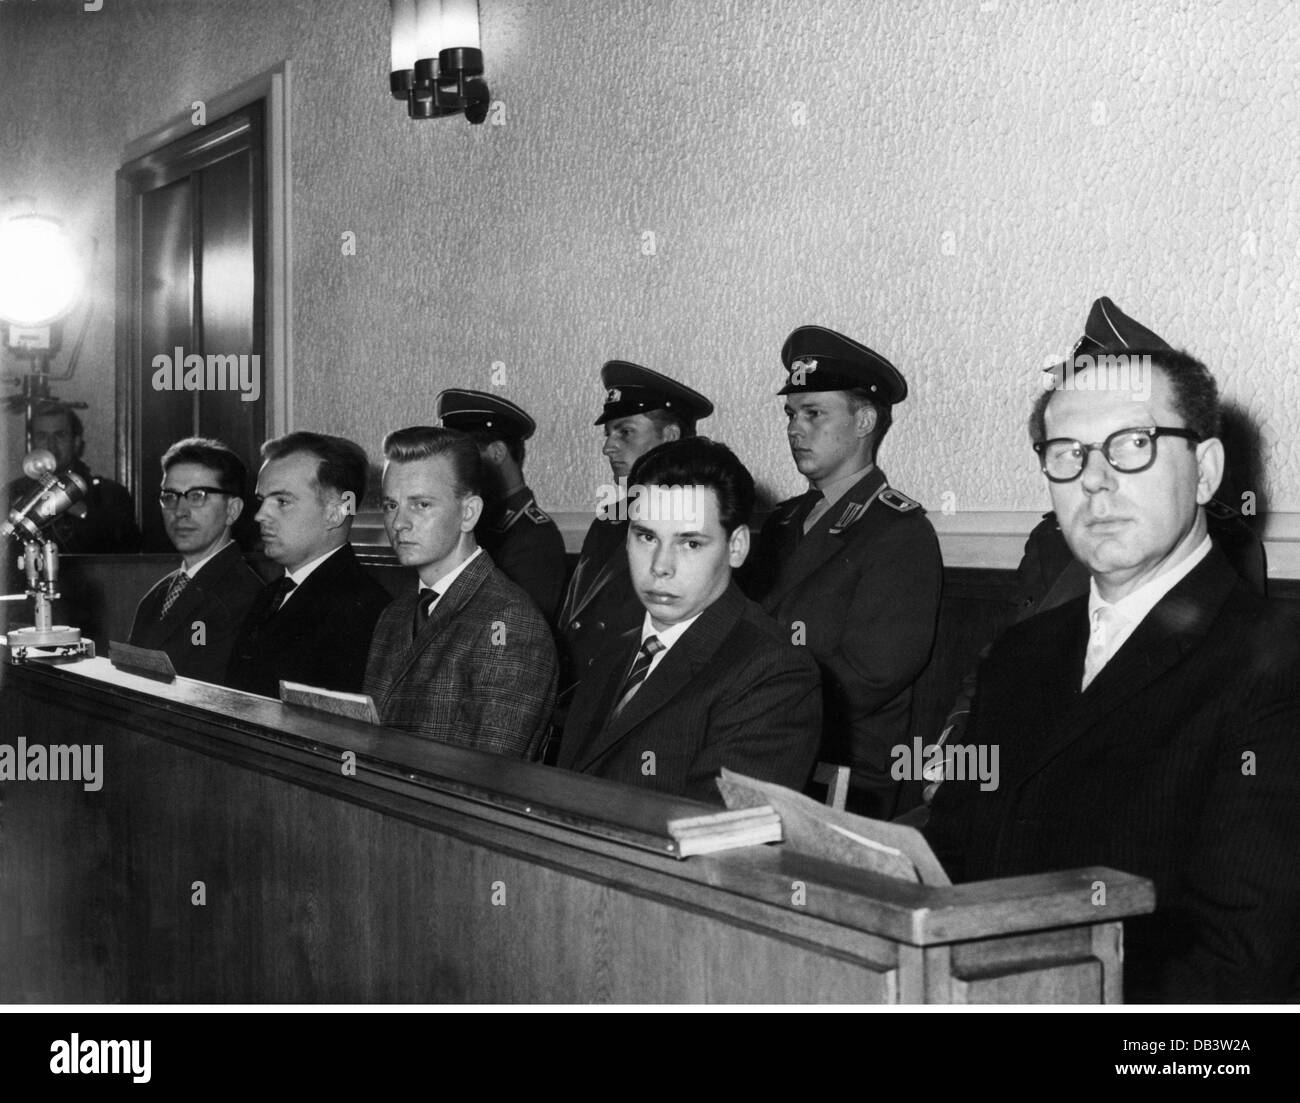 geography / travel, East Germany, justice, Supreme Court, show trial against Heinz Fink, Dieter Gengelbach, Wolfdieter Sternheimer, Hartmut Stachowitz and Horst Sterzik, accused od espionage and terrorism, East Berlin, 30.8.1962, Additional-Rights-Clearences-Not Available Stock Photo